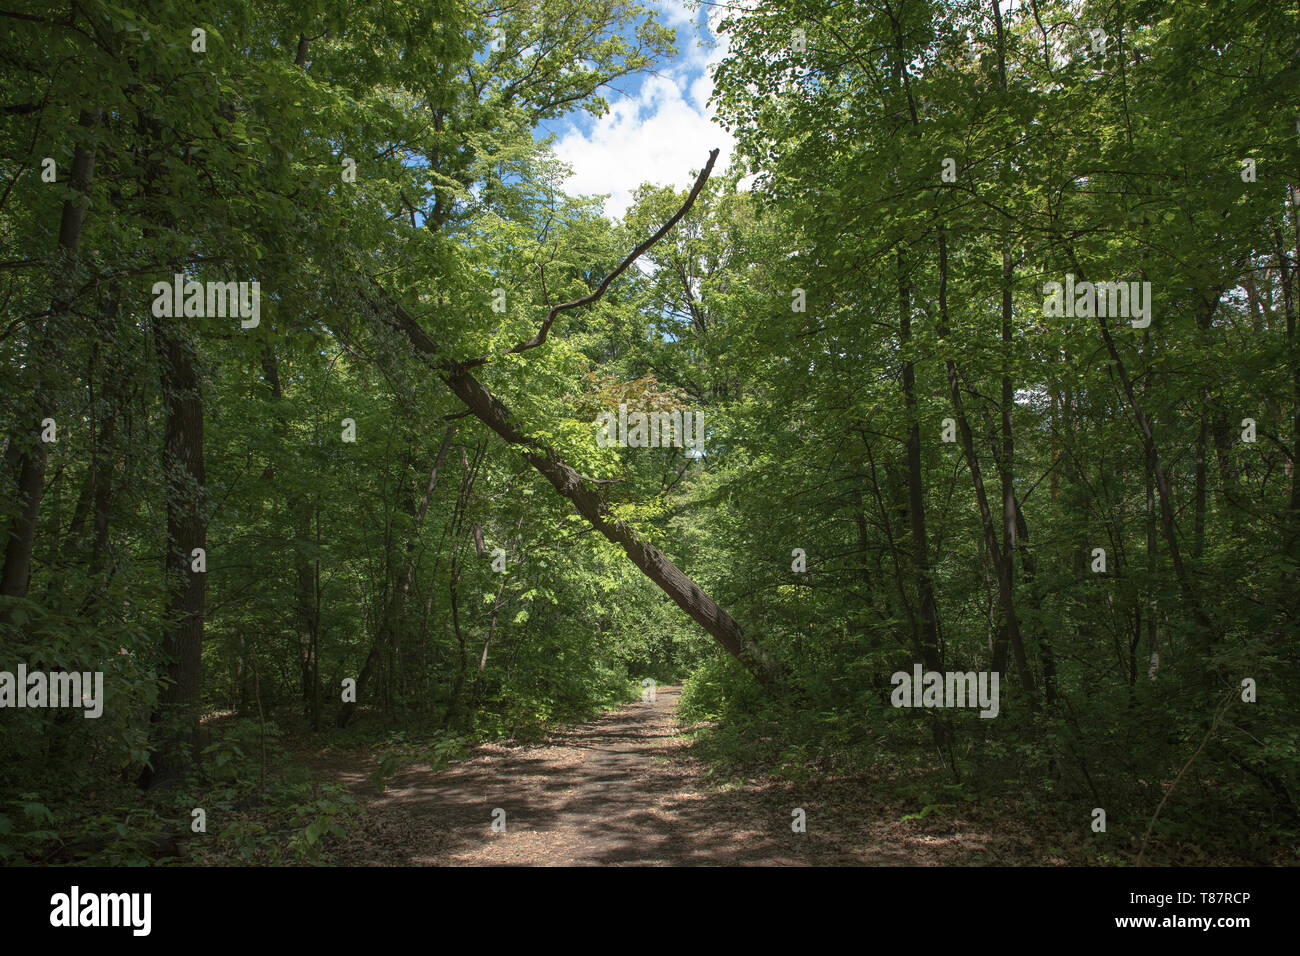 Walking trail in a forest, line with lush green vegetation and tall slender trees. Photographed at Sofia, Bulgaria. Stock Photo